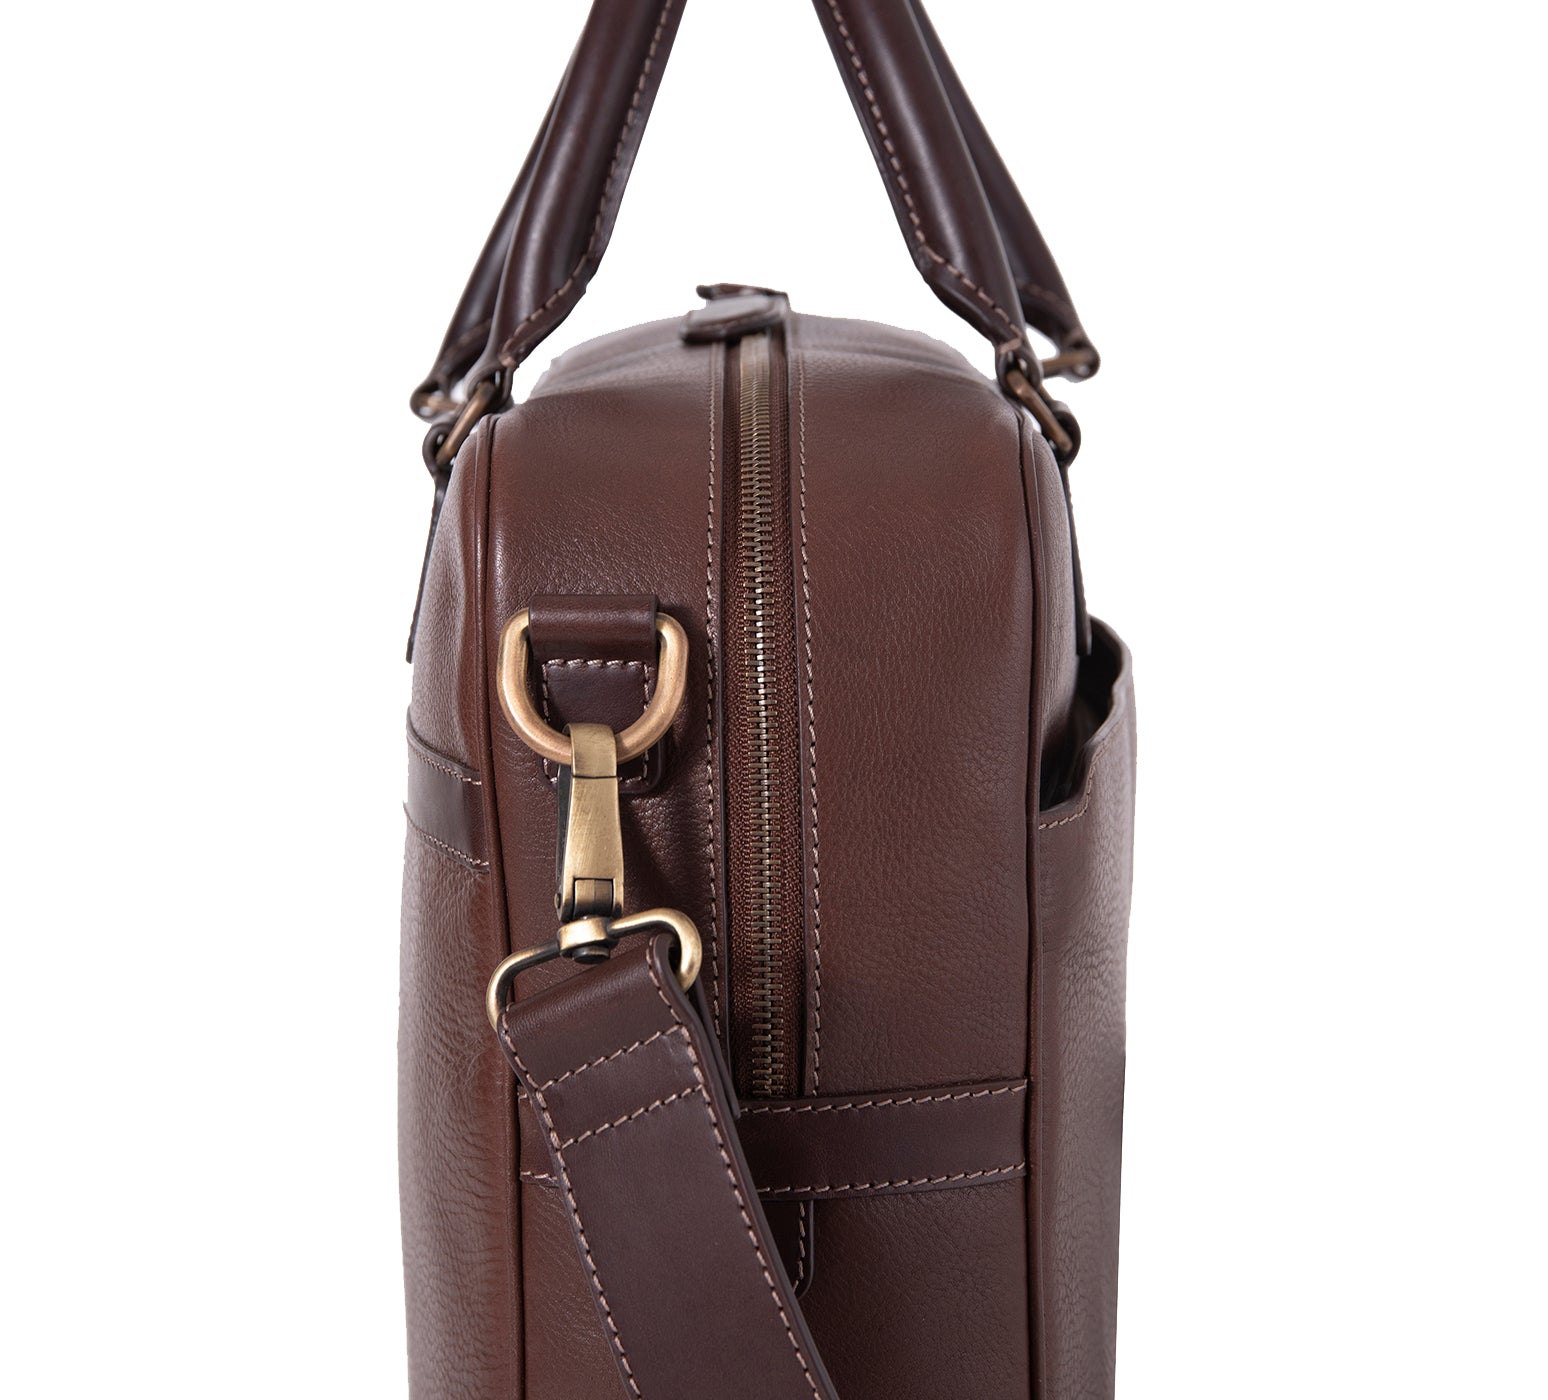 The Lexington Mens Leather Briefcase from Rydal in 'Dark Brown' showing close up of side of bag.